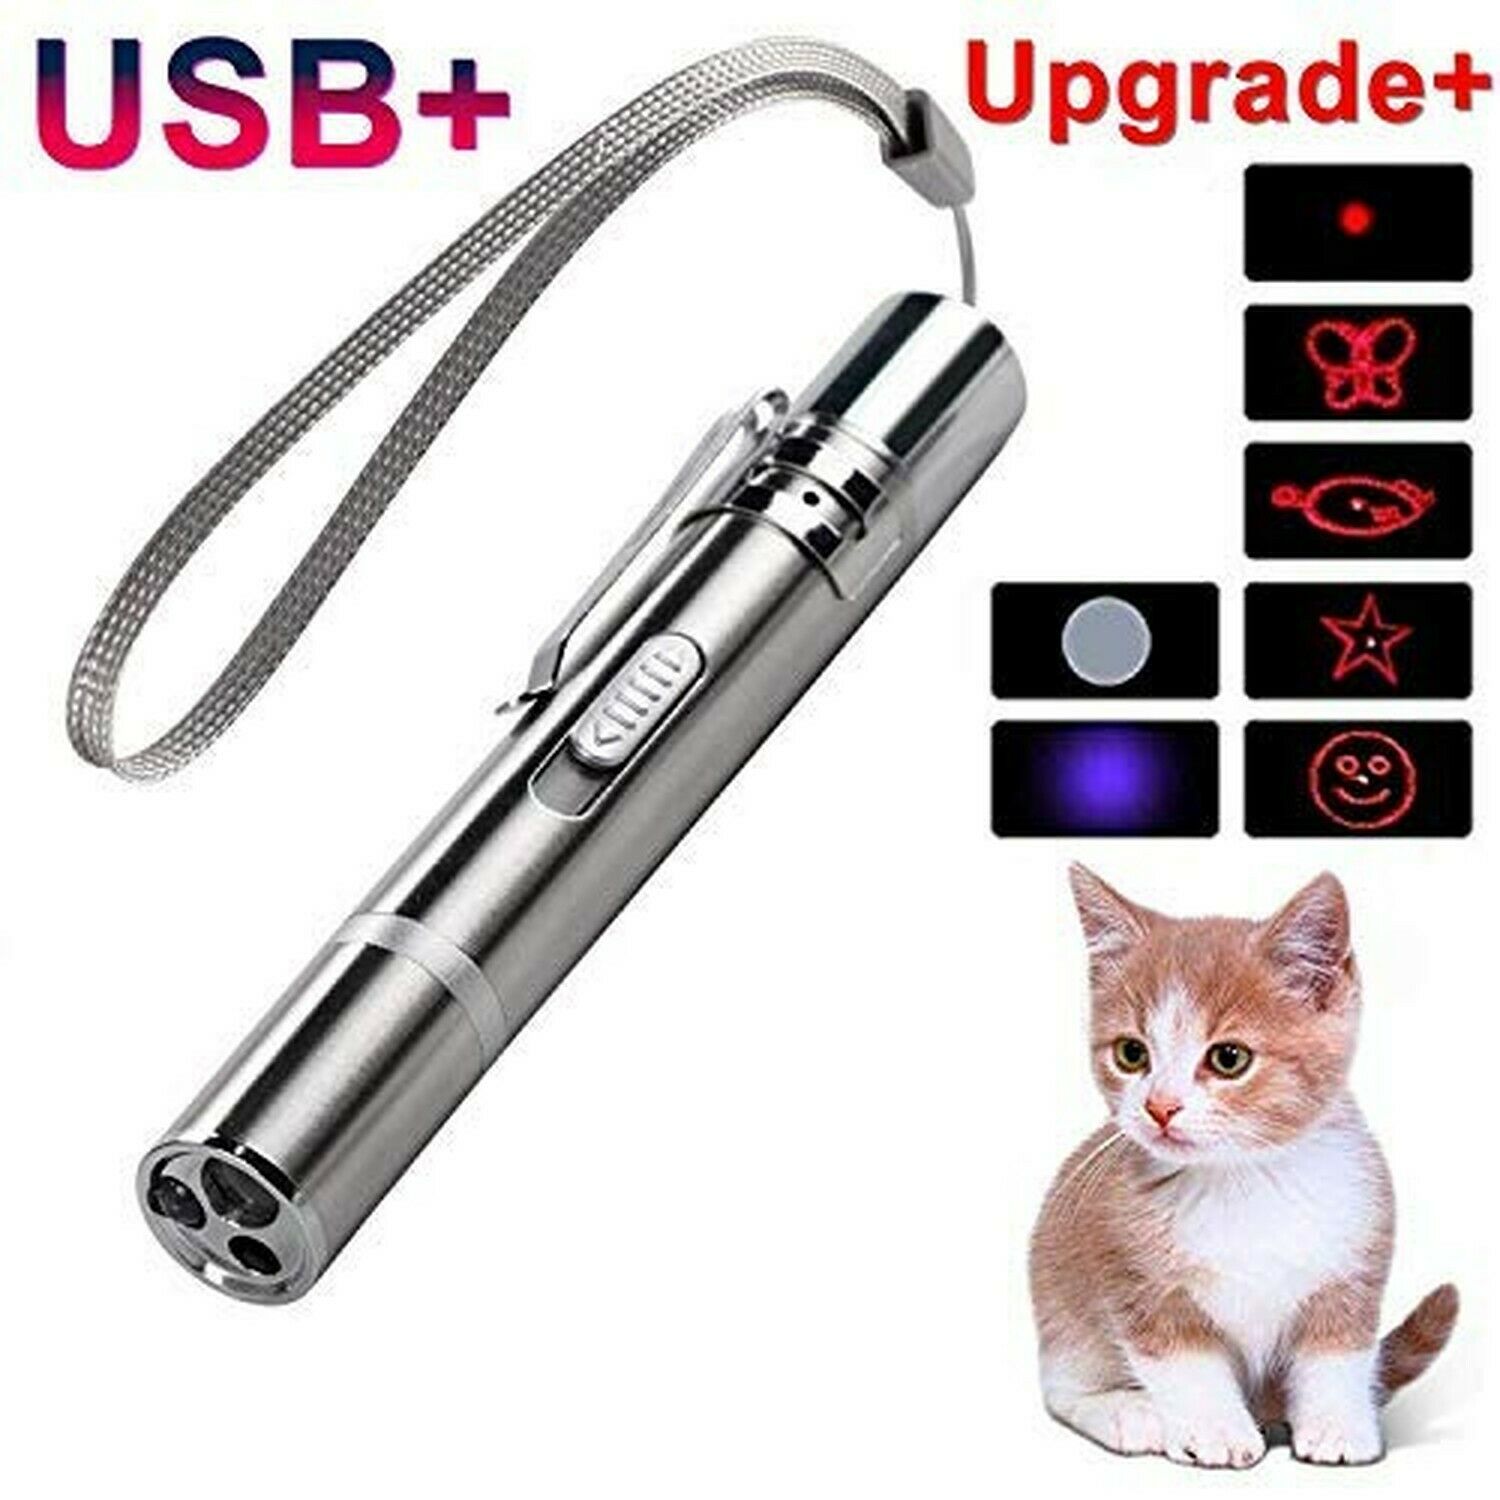 PetLovers Premium Rechargeable Red Laser Pointer & Lazer/Flashlight Cat Toy New 